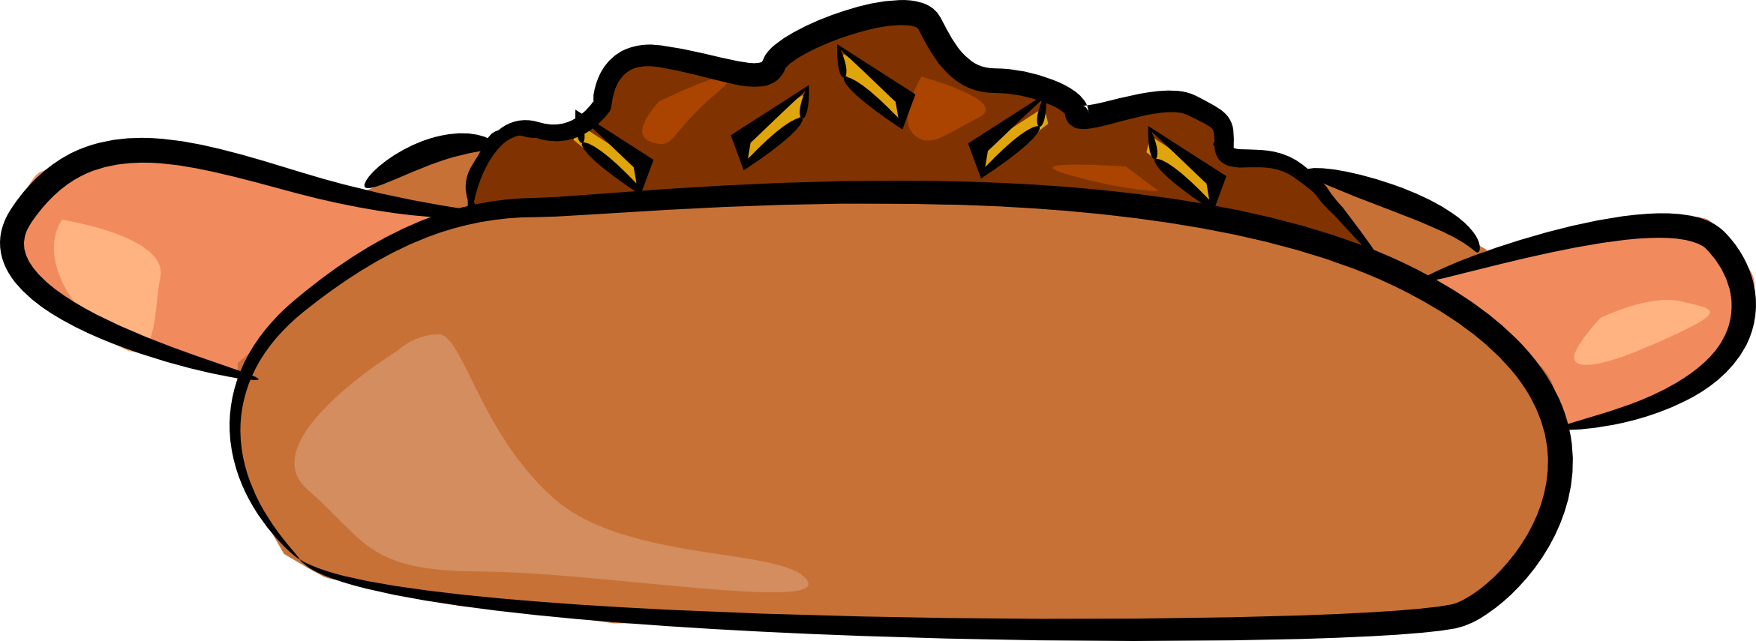 Images For > Chili Cook Off Clipart